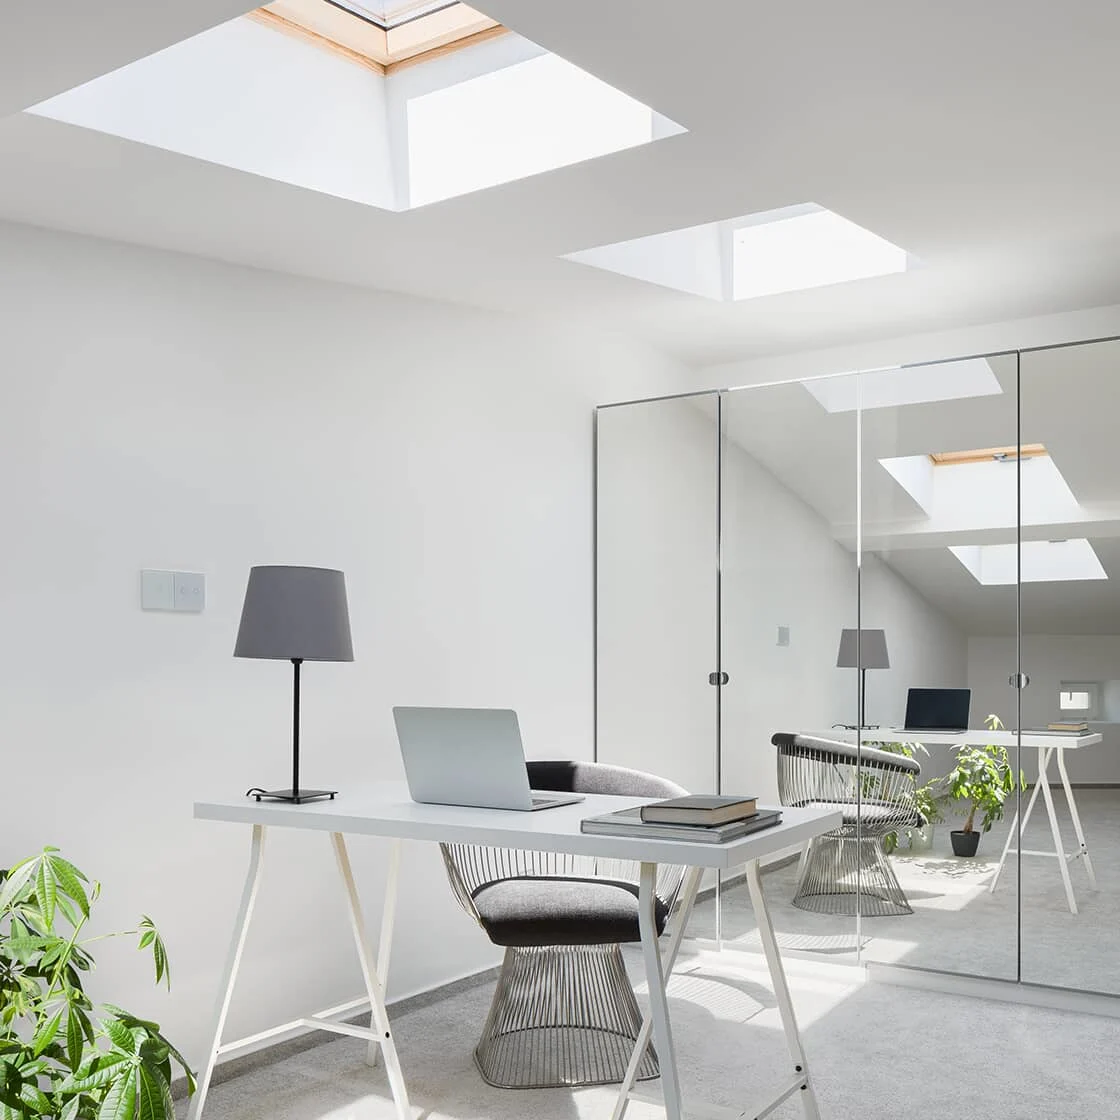 Attic office with skylights